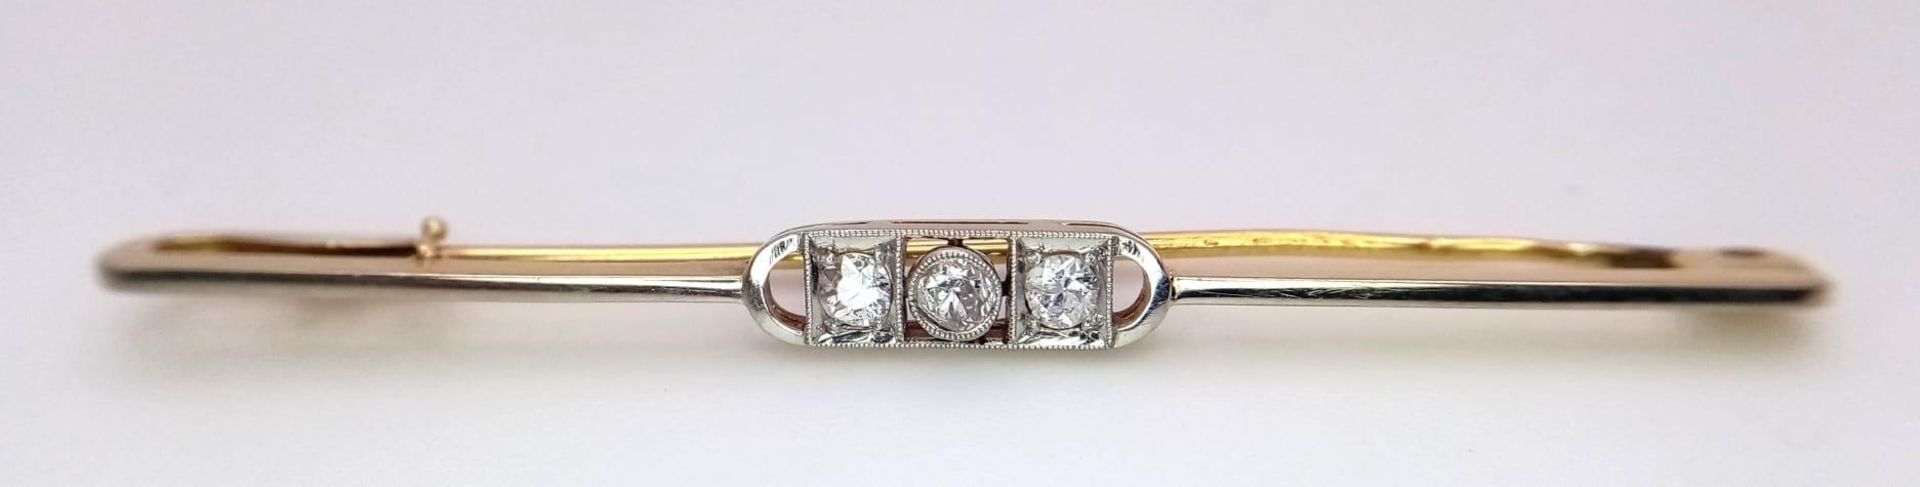 An 18k yellow gold diamond set tie pin with safety catch. 3.6g (dia:.30ct)